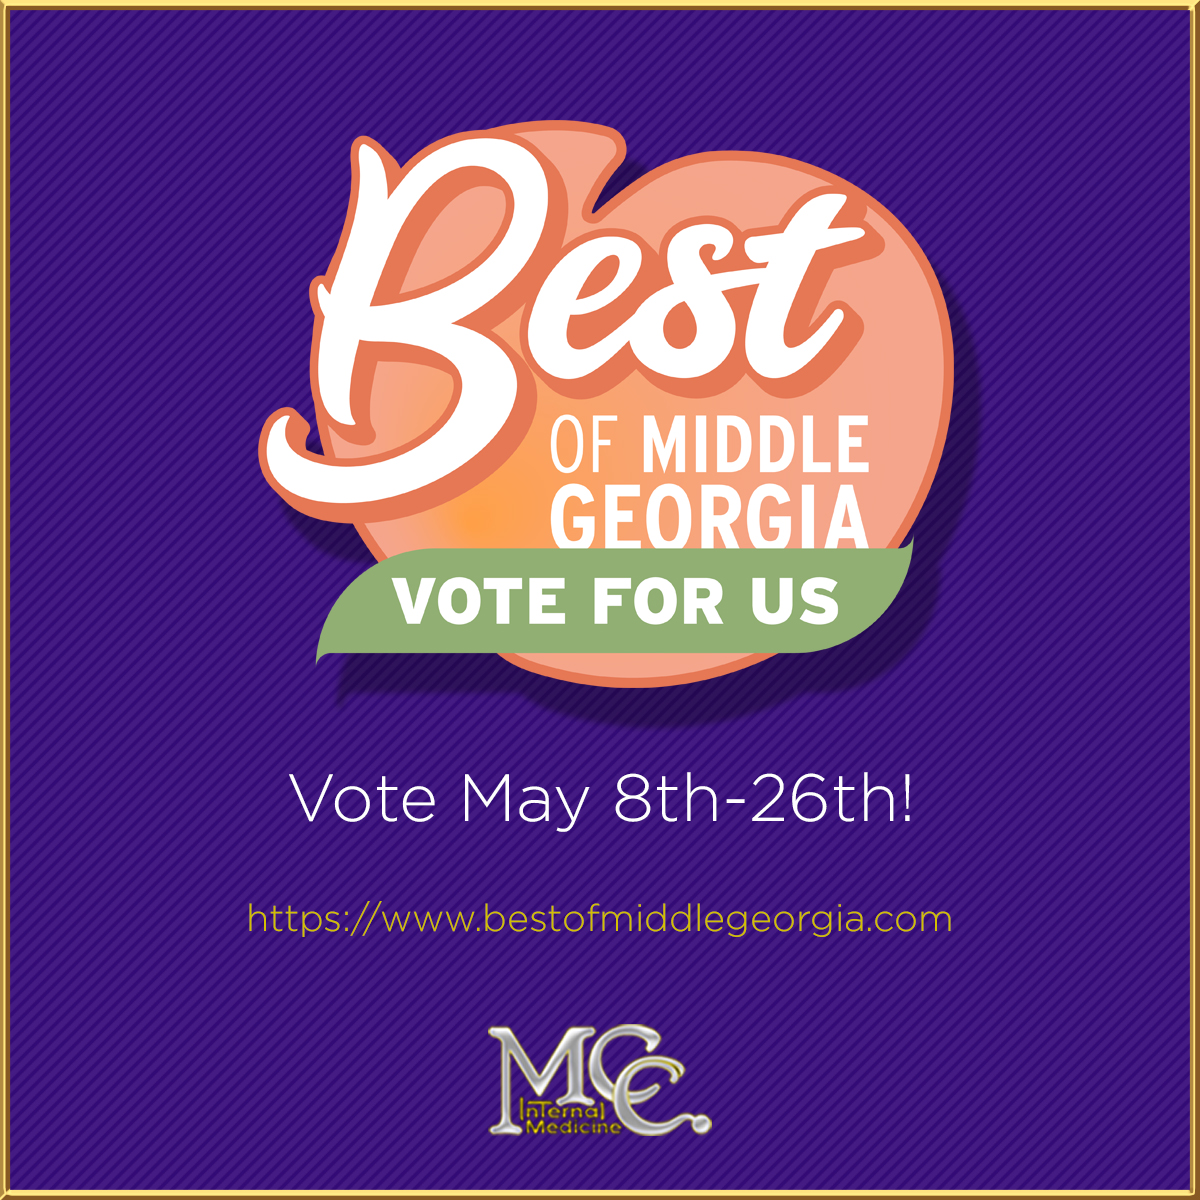 Nominations are done. Now it is time to vote. 

VOTING for the Best of Middle Georgia begins today AT NOON!

Vote at bestofmiddlegeorgia.com. 

You can vote once a day until May 26th.

Thank you so much!

#BestofMiddleGeorgia #mccinternalmedicine